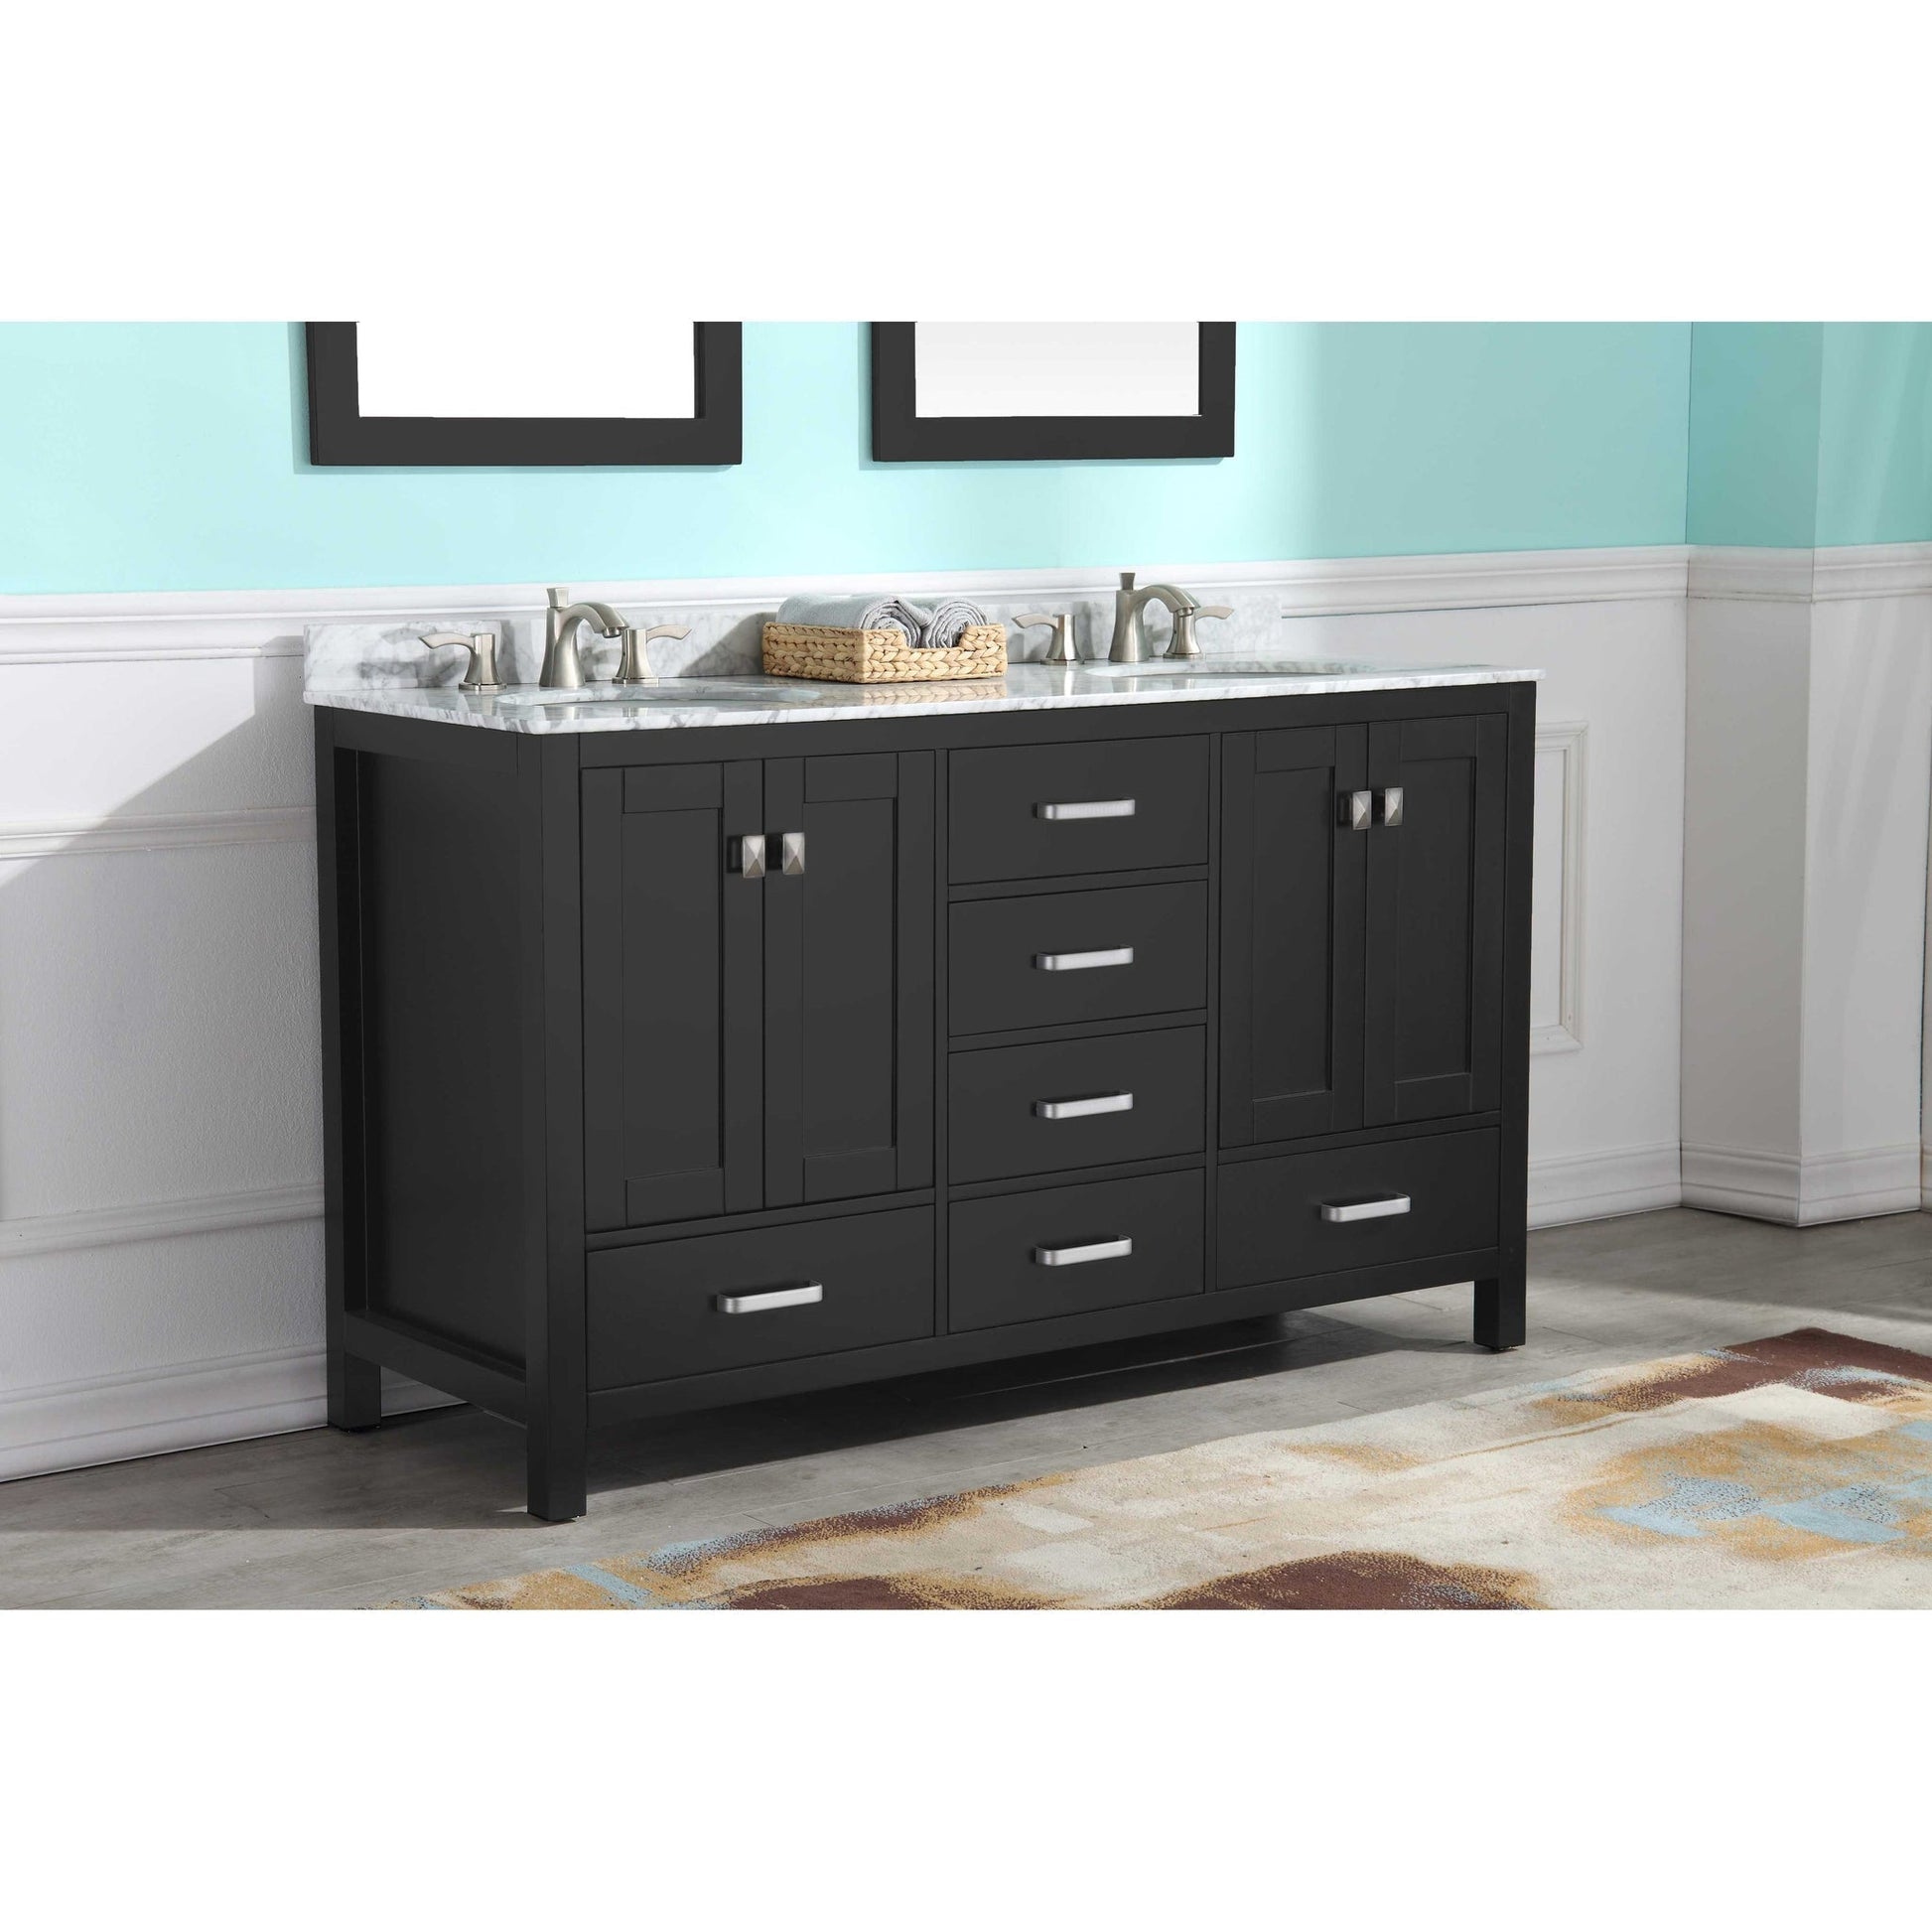 ANZZI Chateau Series 60" x 36" Rich Black Solid Wood Bathroom Vanity With White Carrara Marble Countertop, Basin Sink and Mirror